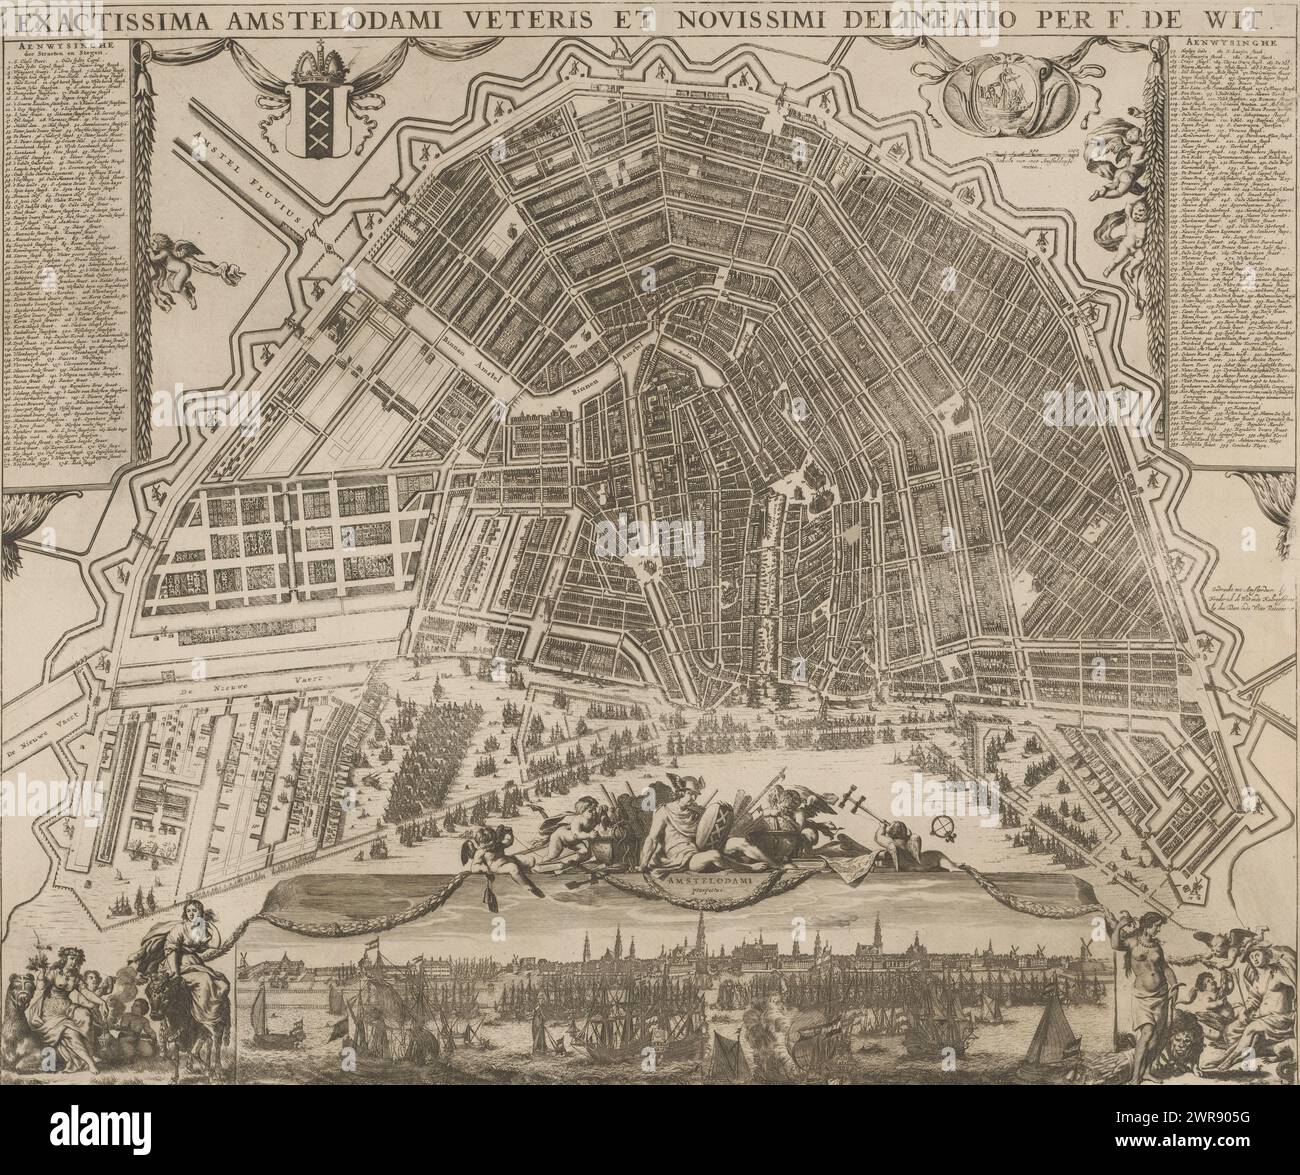 Map of Amsterdam, Exactissima Amstelodami veteris et novissima delineatio (title on object), Map in bird's eye view. The title along the top. Top left the legend 1-178. To the right of it is the city's coat of arms. Top right the legend 179-354 with the city seal and a scale stick to the left: Scale of 1000 Amsteldam feet. Bottom left a female figure with a censer on a camel or dromedary as a personification of Asia and Europe on a bull as a personification of the continent of the same name. In the bottom middle a view of the city, seen from the IJ Stock Photo